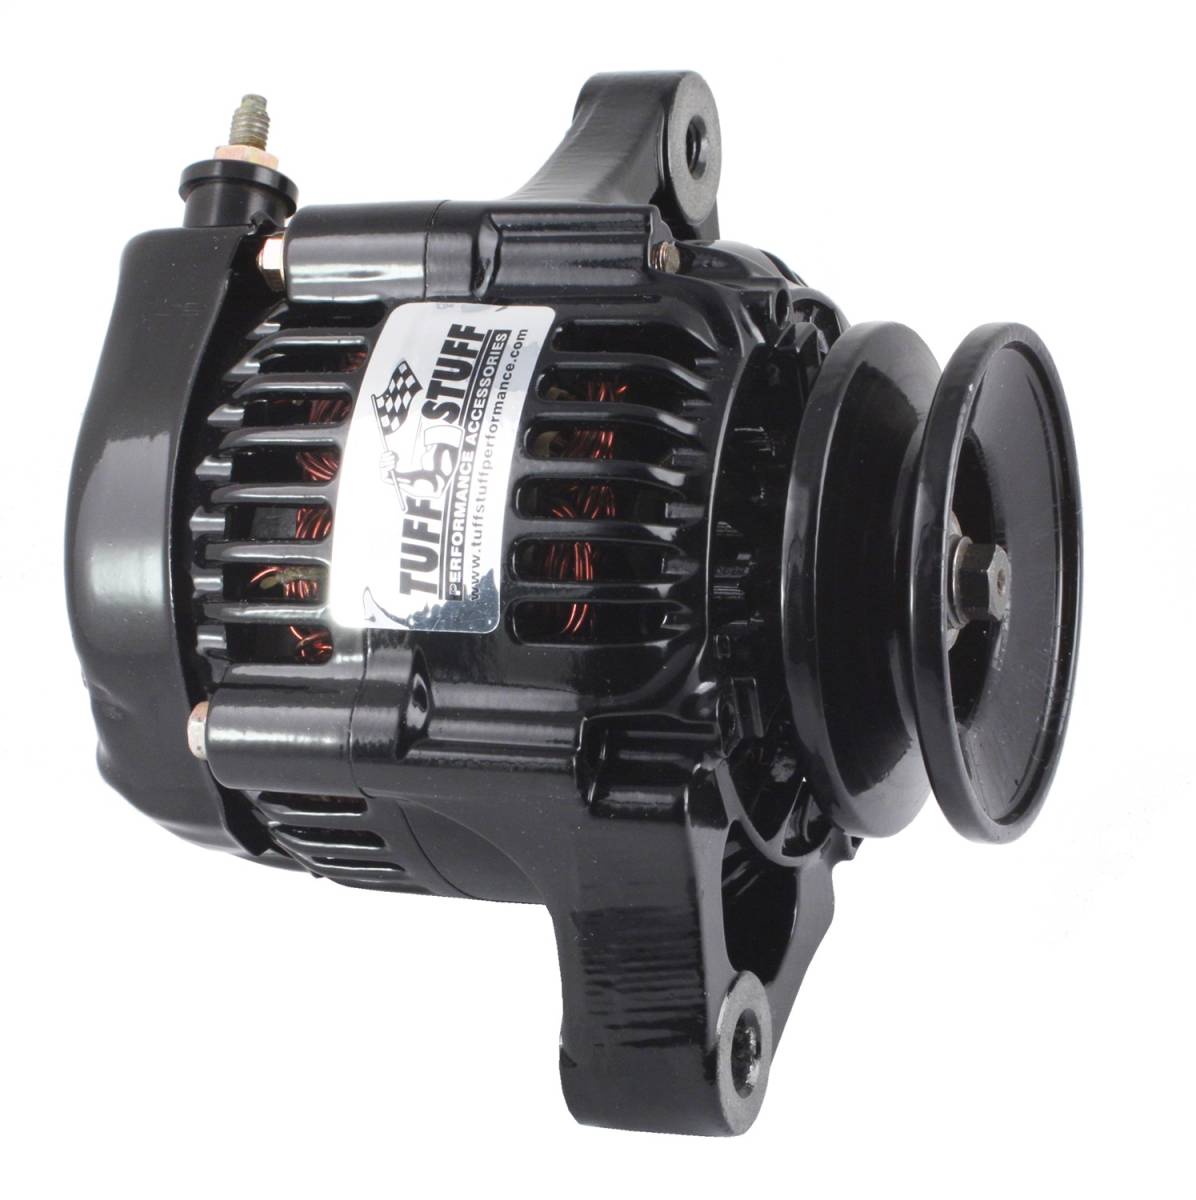 Tuff Stuff Performance - Compact Design Alternator 55 AMP Ultra Mini Nippondenso 1 Wire Single Groove Pulley For Use w/Performance Cars/Street Rods/Show Cars w/Low Amp Requirement Black 7512B